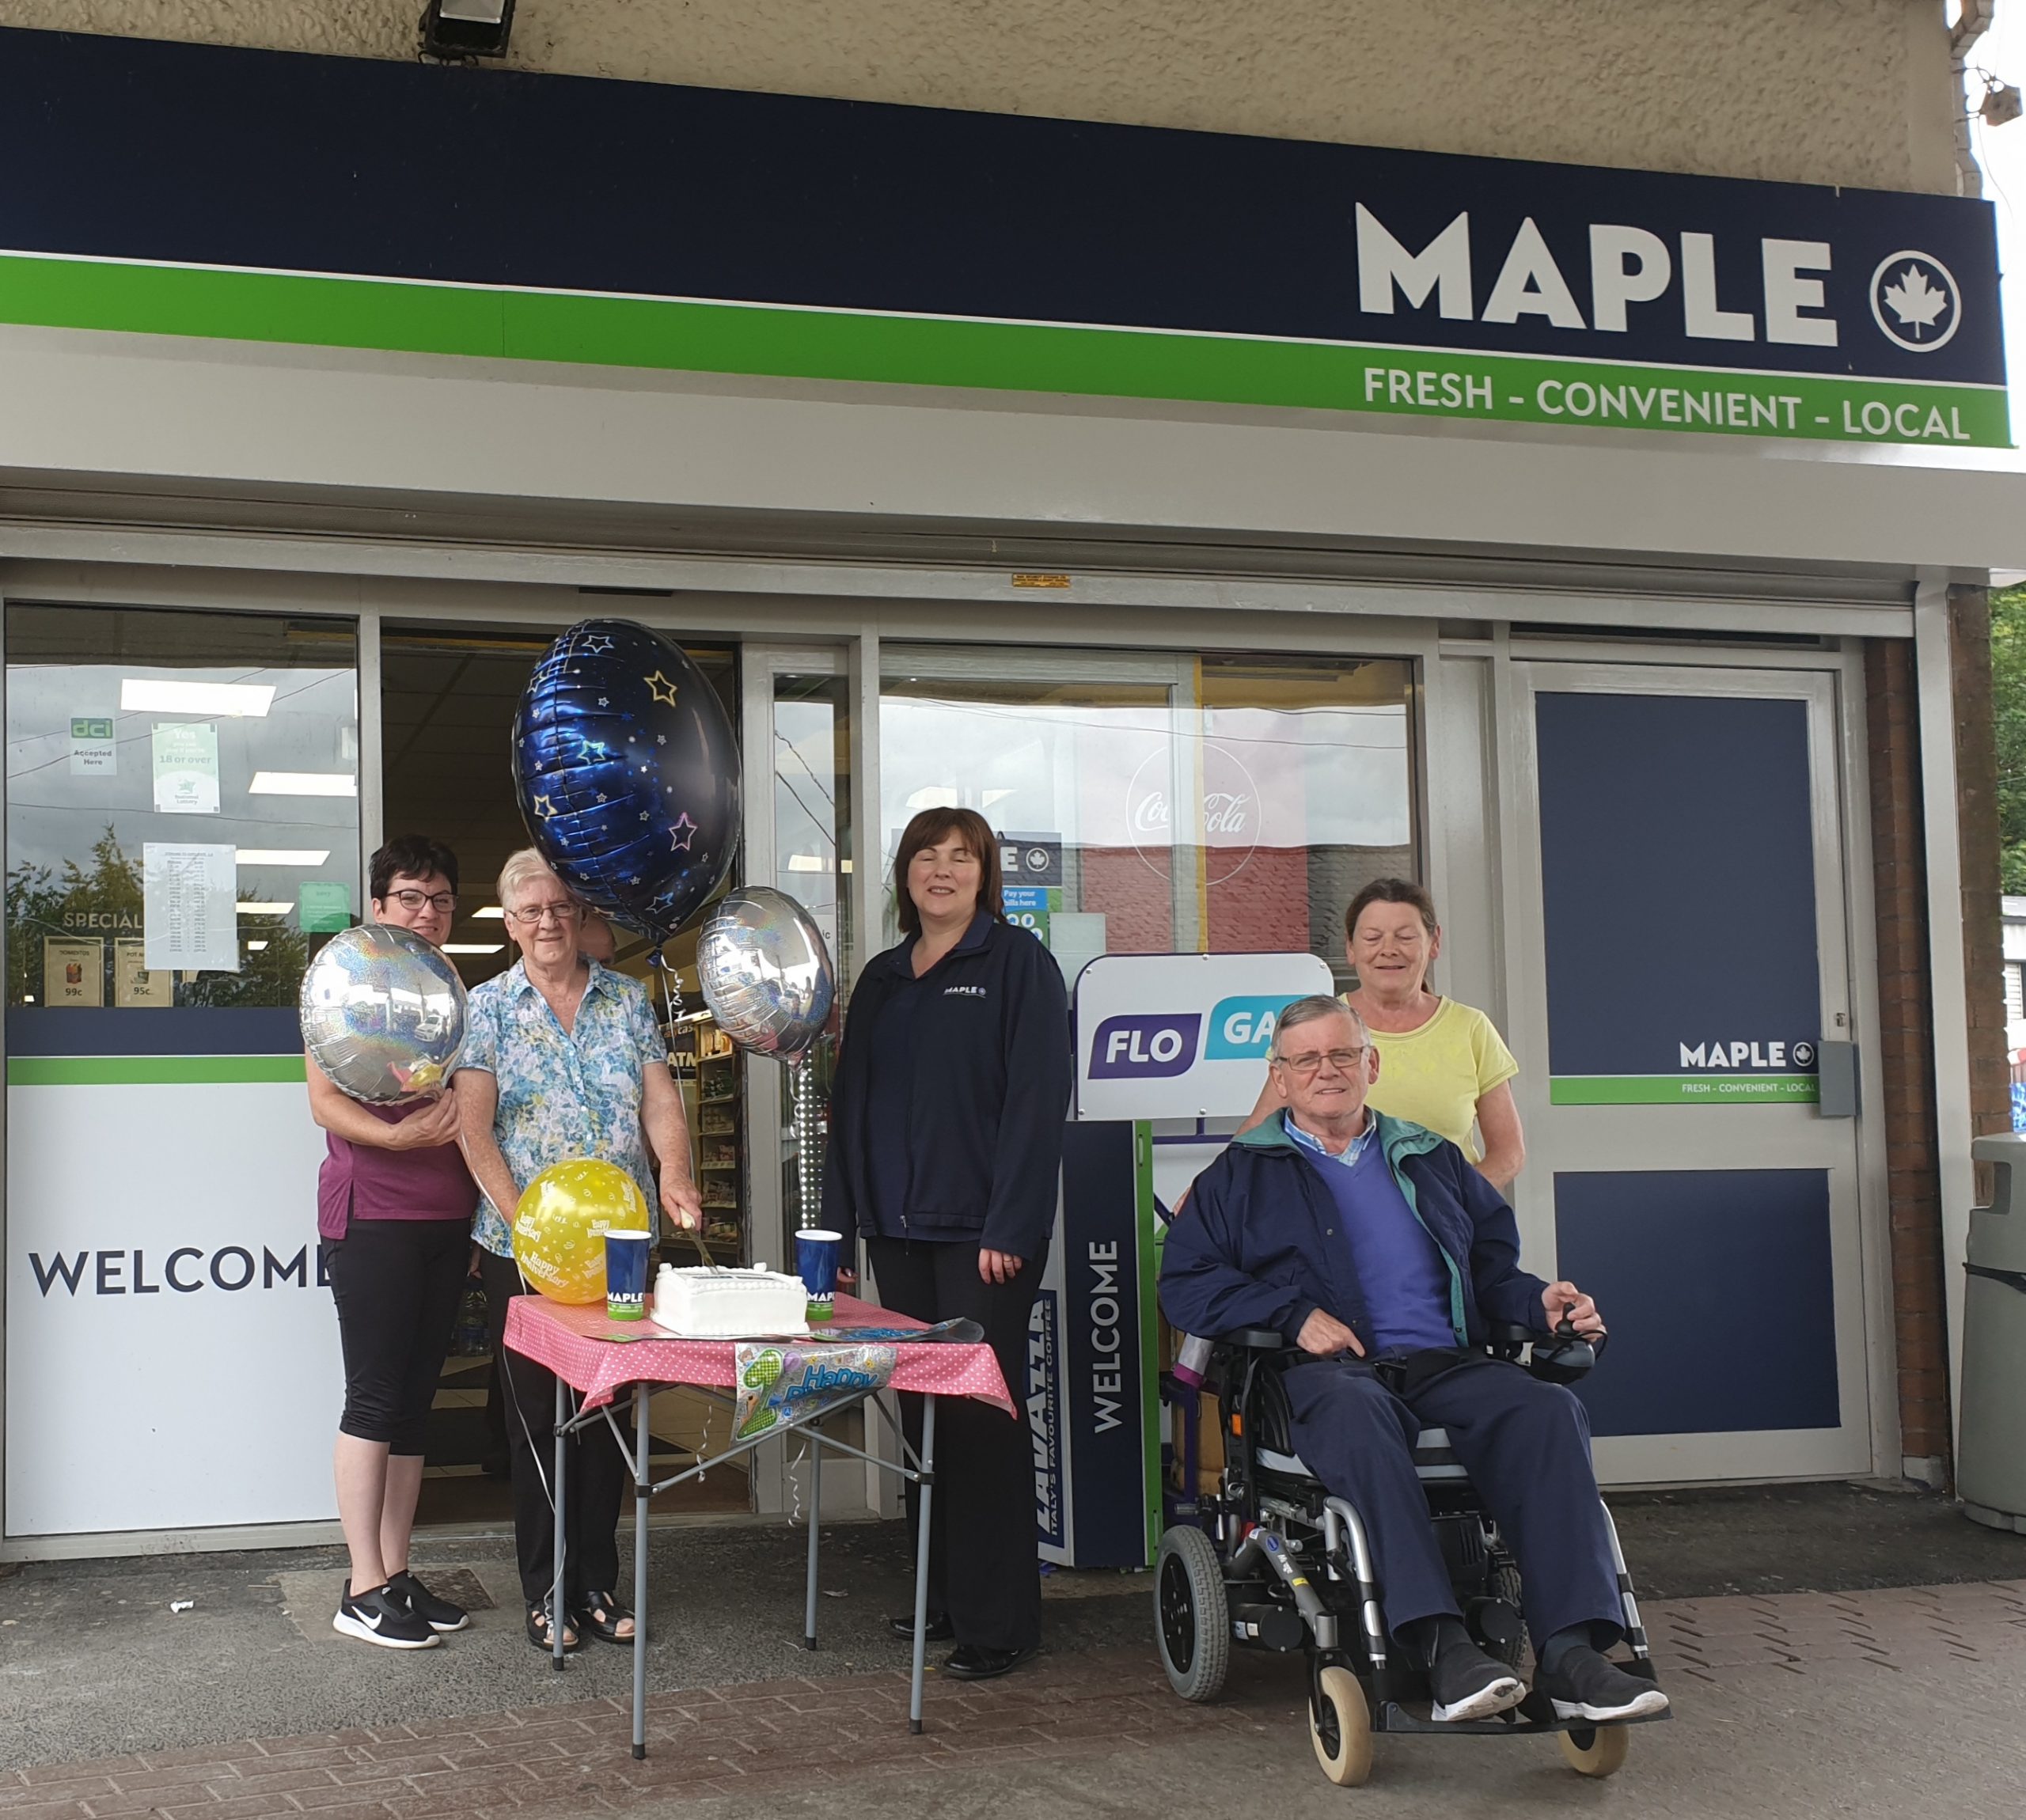 Maple Group Celebrate Their First Anniversary with News of a New Store Coming Soon.